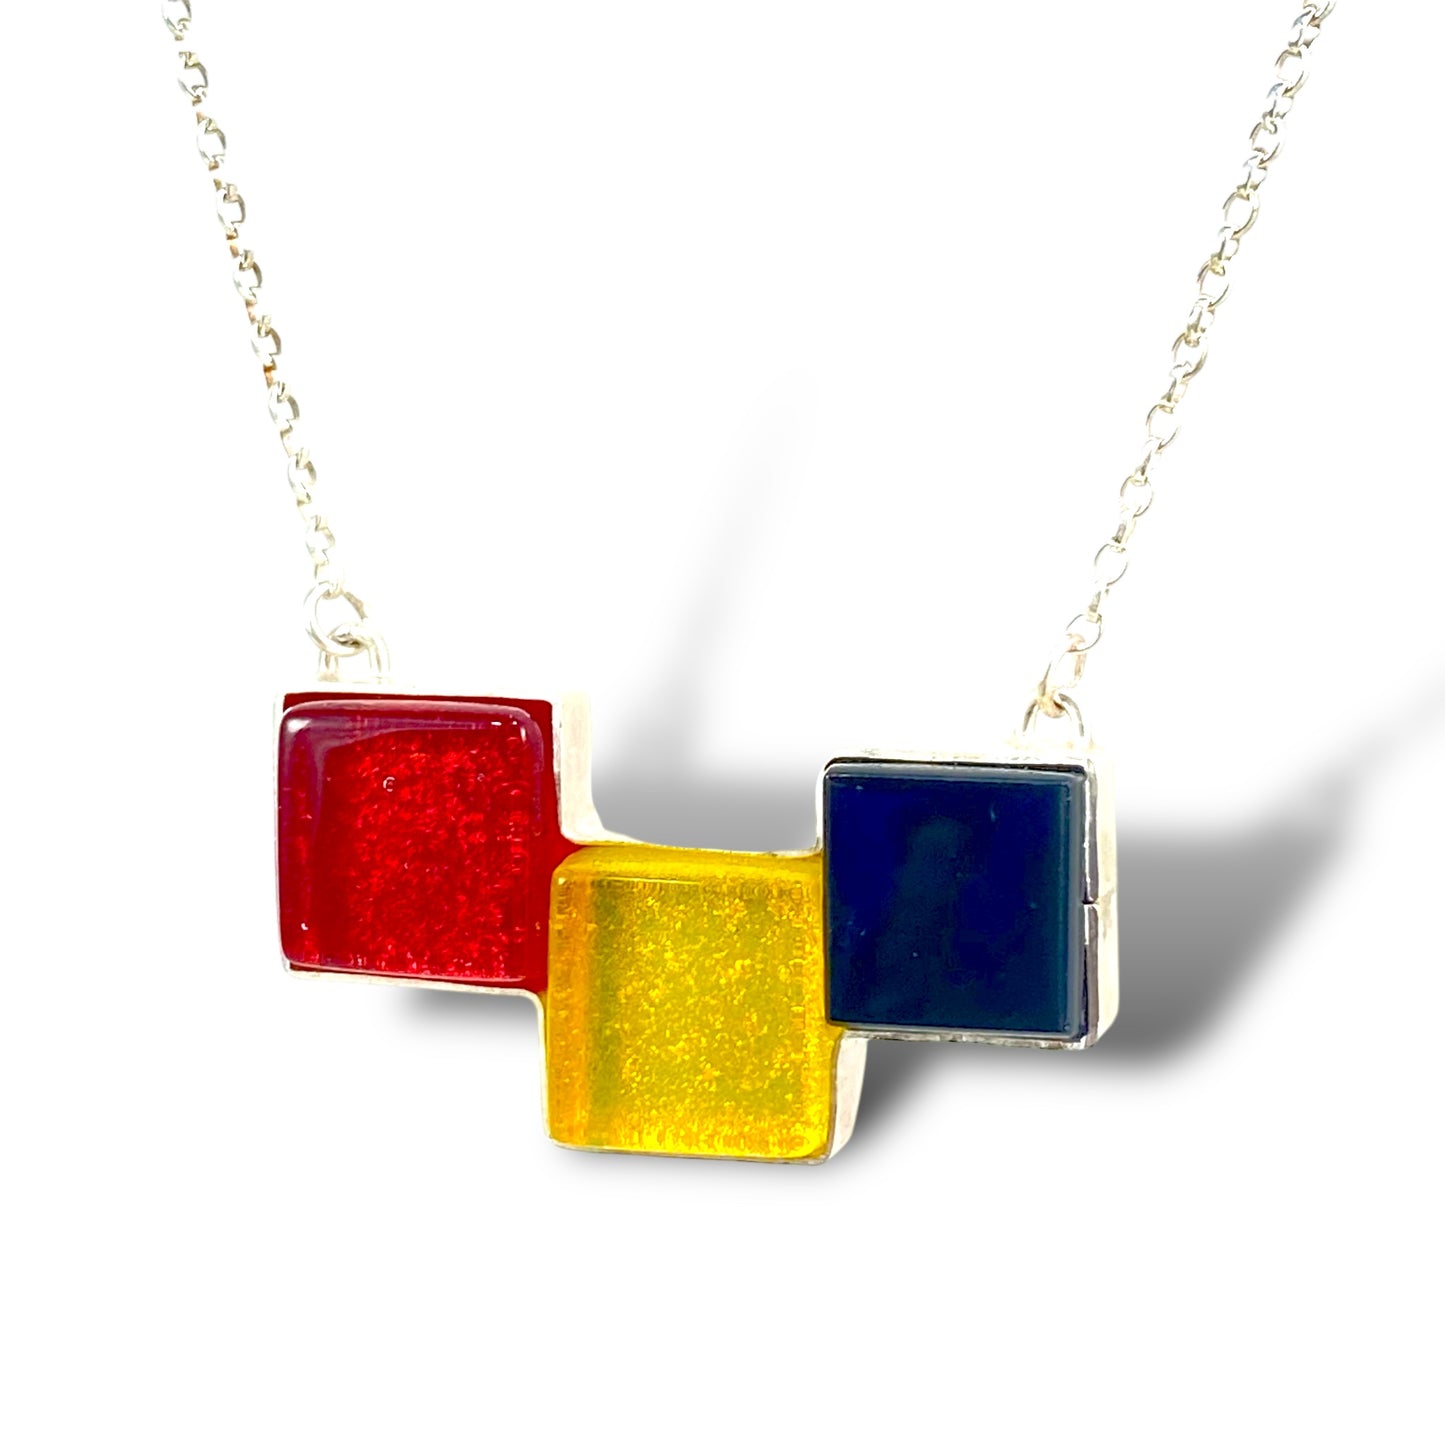 MCM 3 Square Necklace in Cherry Red, Lemon Yellow & Black